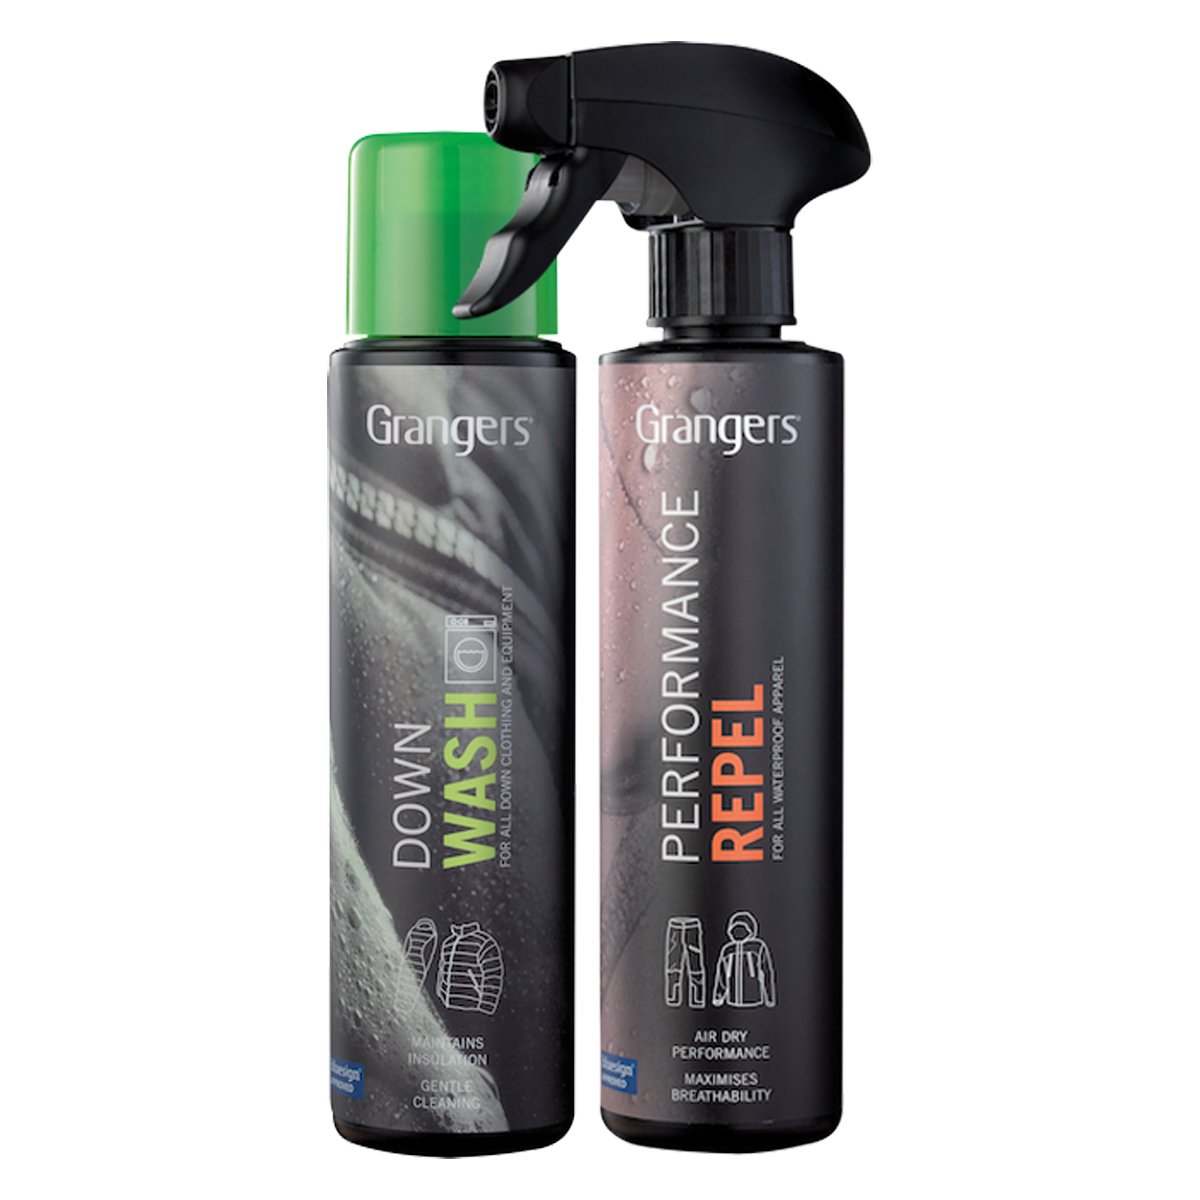 Grangers Down Wash & Performance Repel Combo Pack in Grangers Down Wash & Performance Repel Combo Pack by Grangers | Apparel - goHUNT Shop by GOHUNT | Grangers - GOHUNT Shop